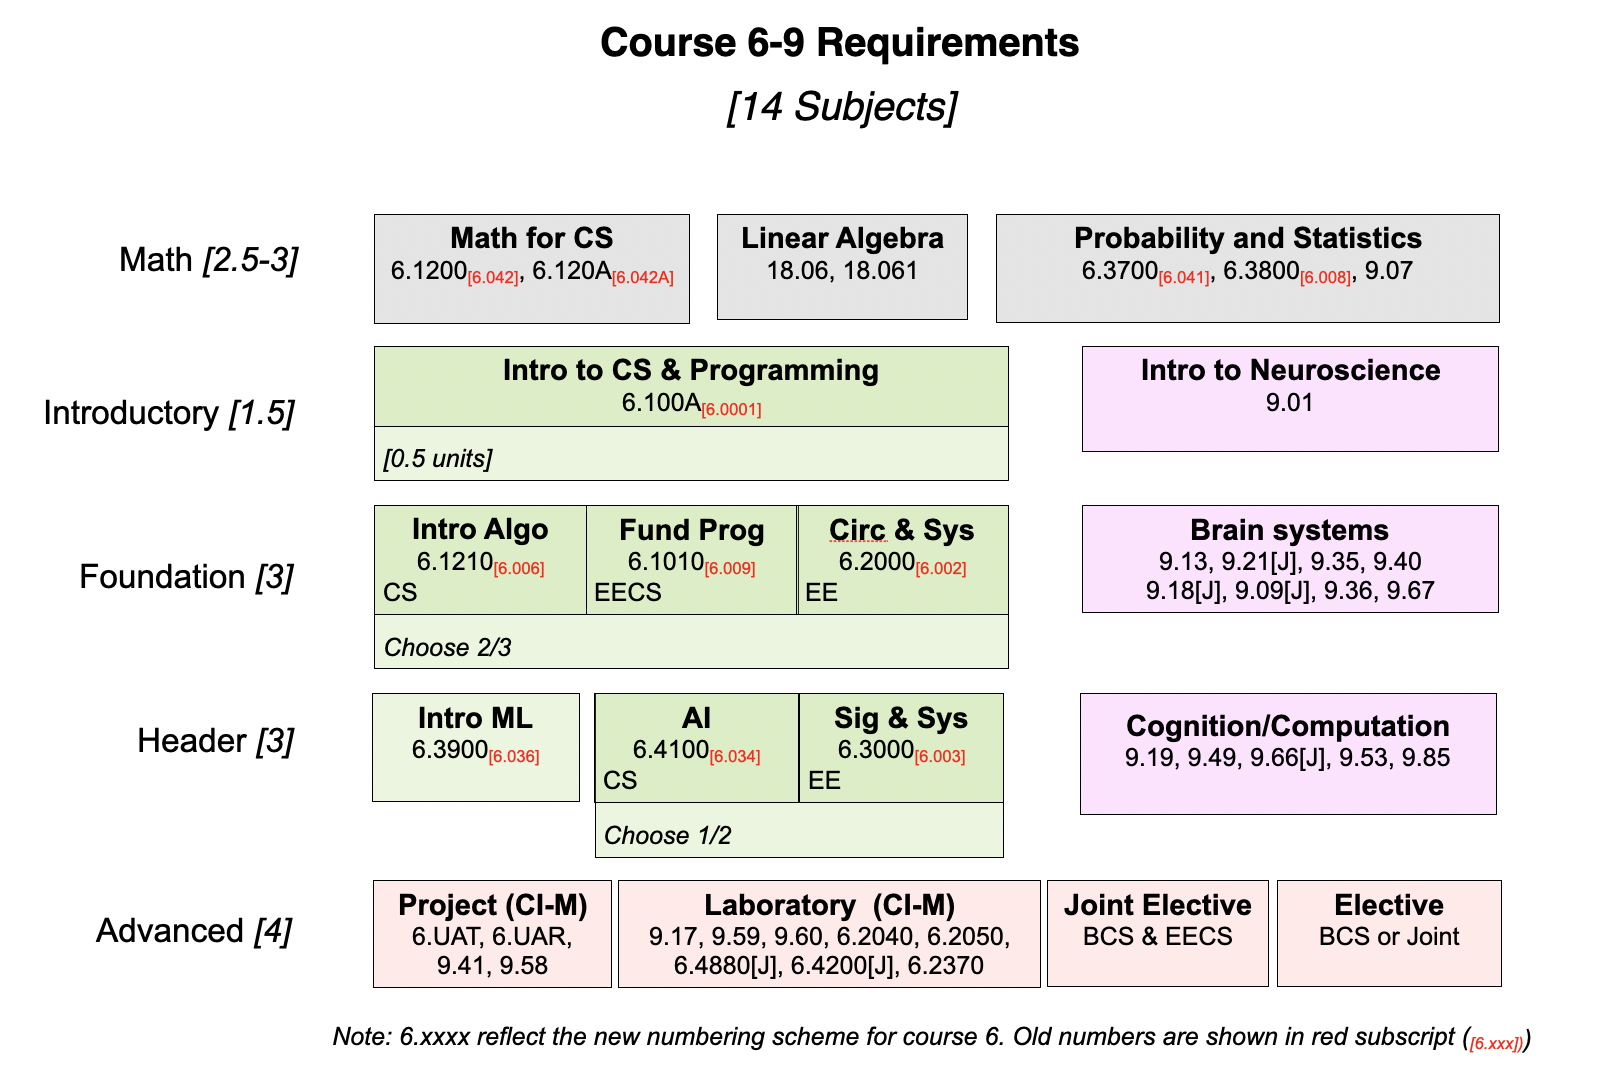 flow chart of 6-9 degree and subjects